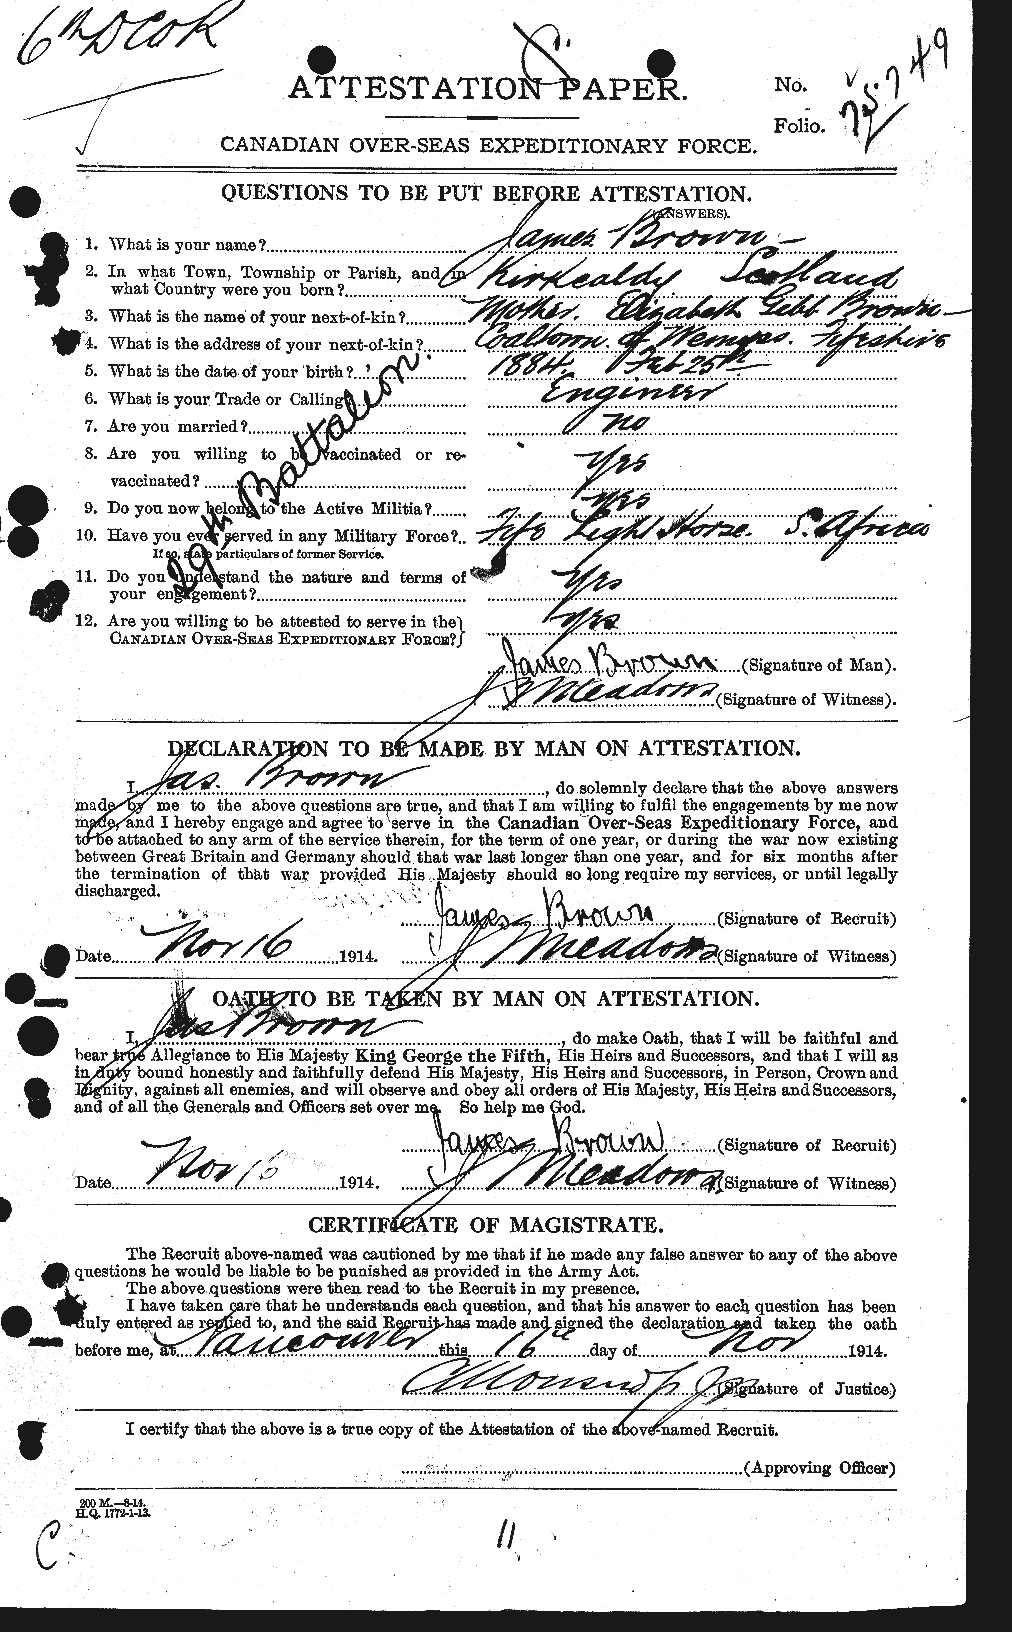 Personnel Records of the First World War - CEF 265762a